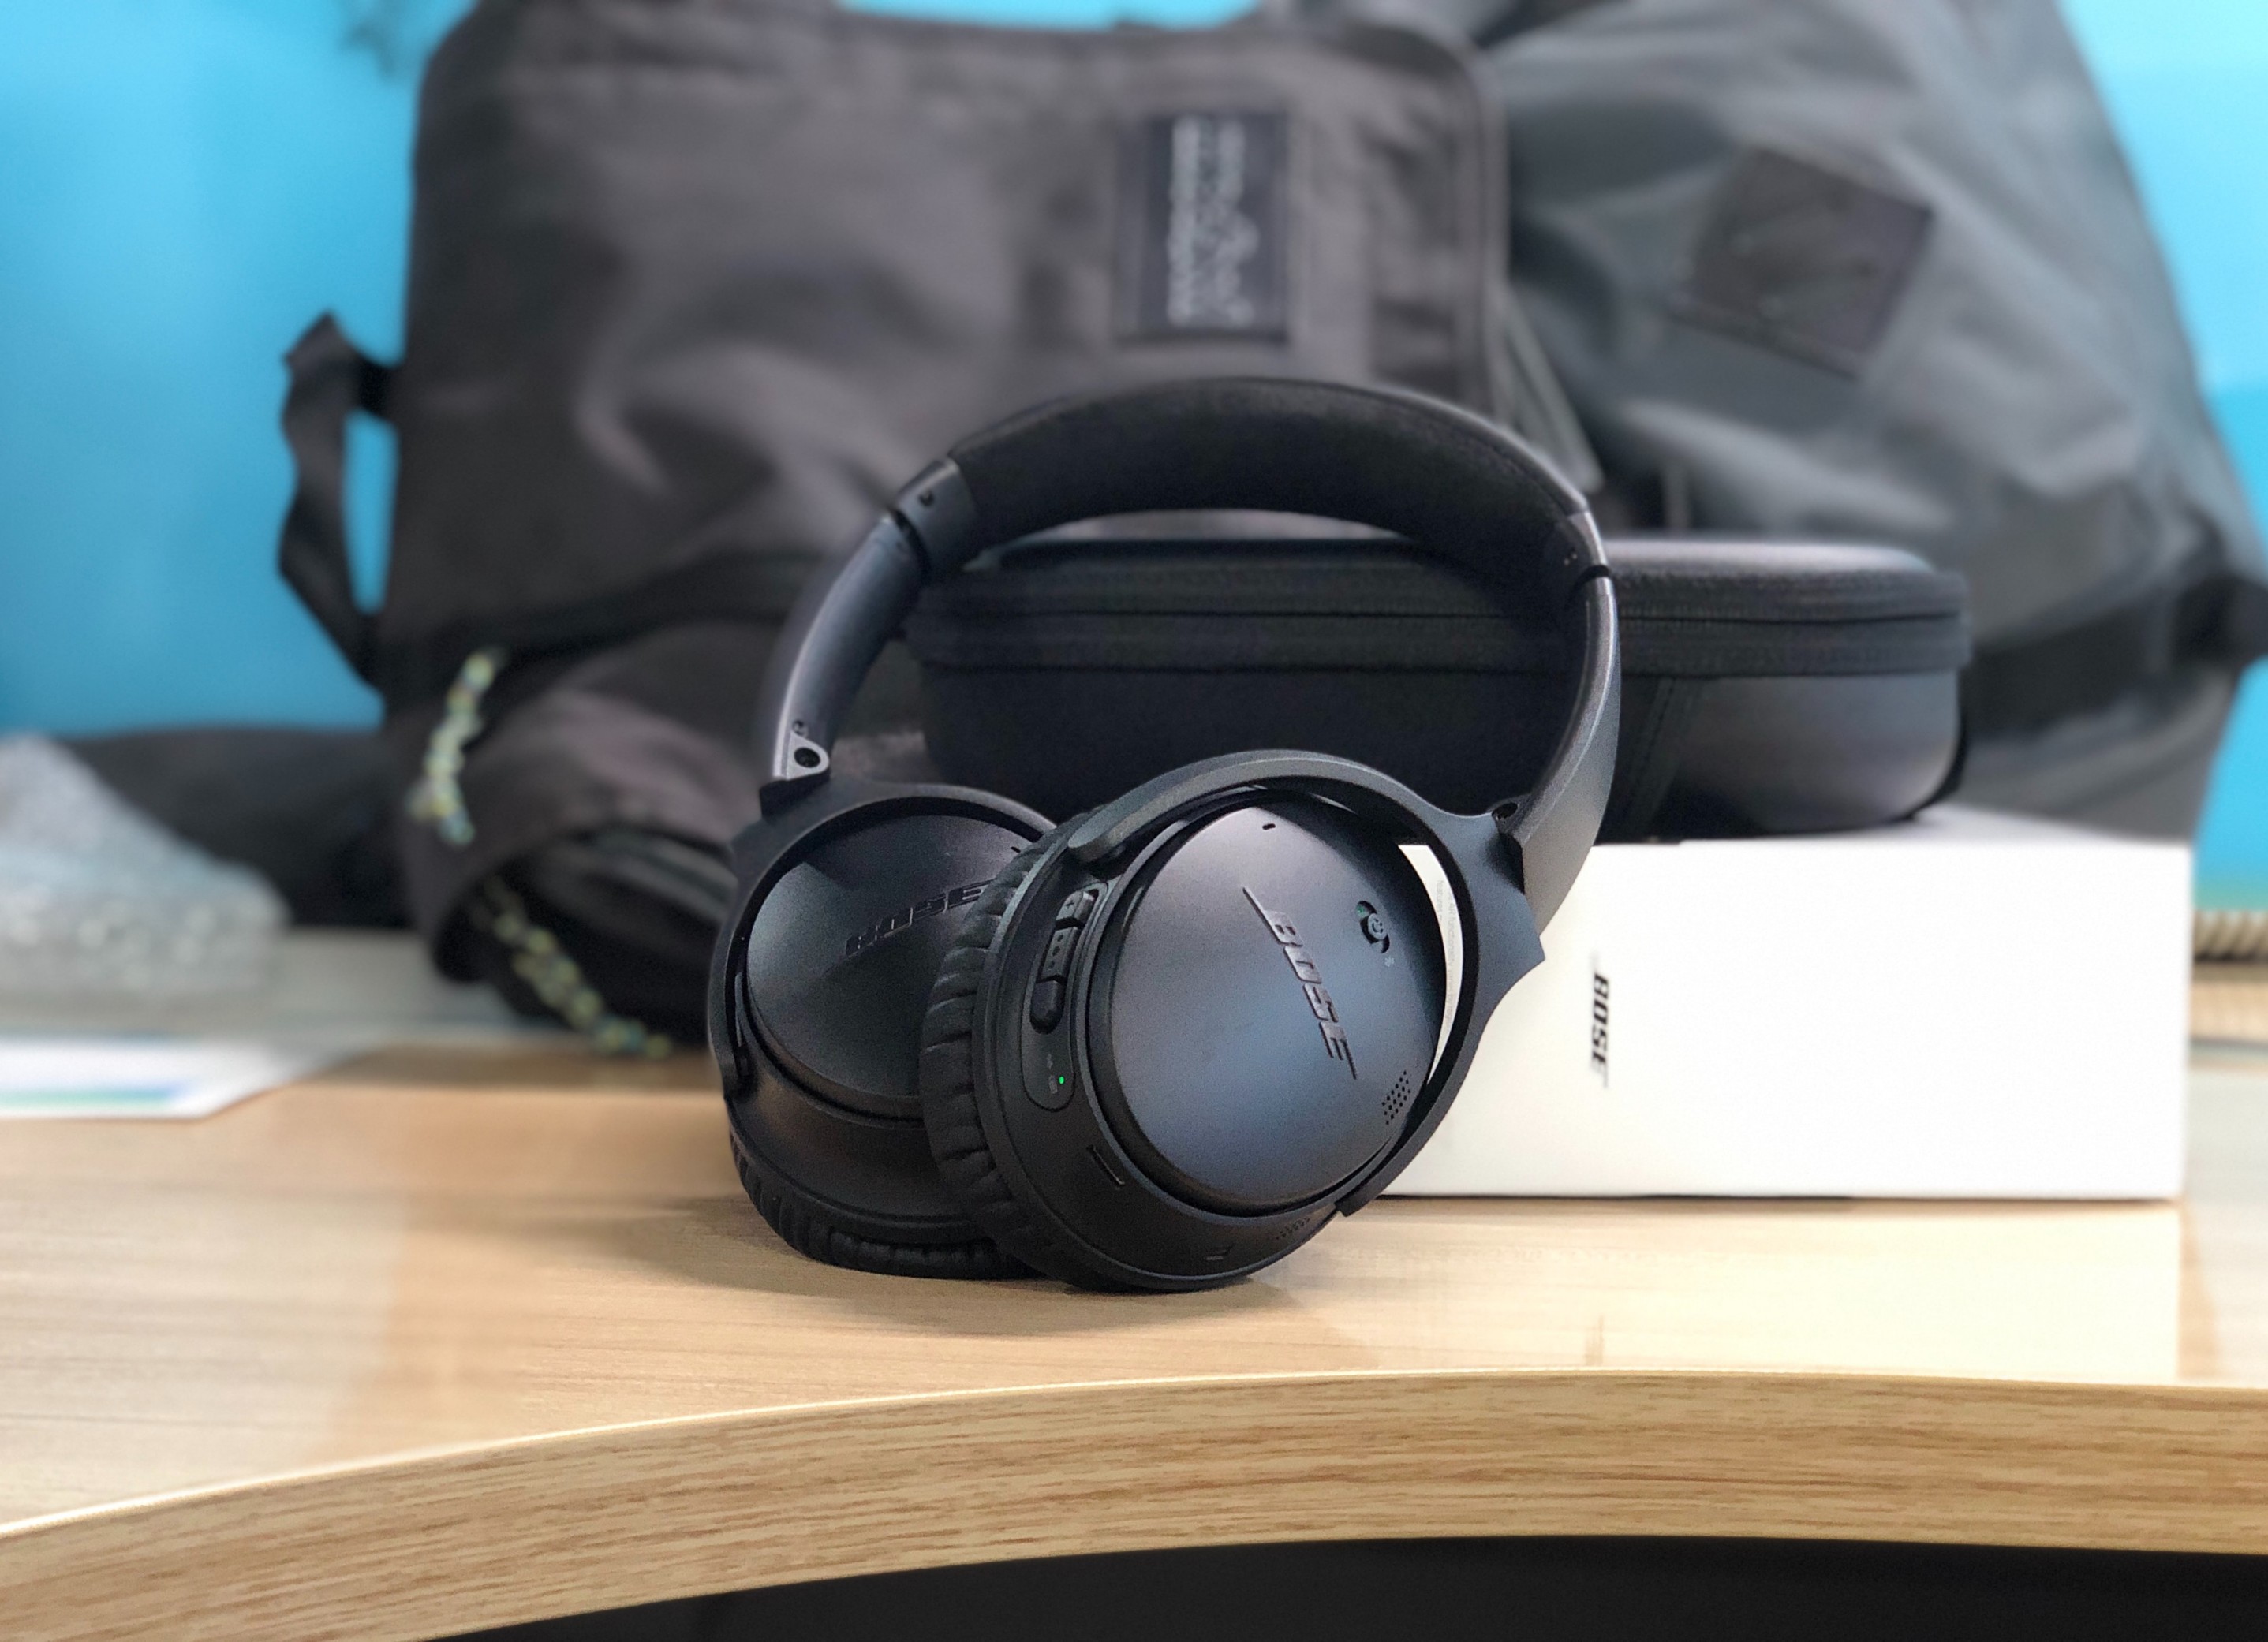 Bose A20 Aviation Headset with Bluetooth